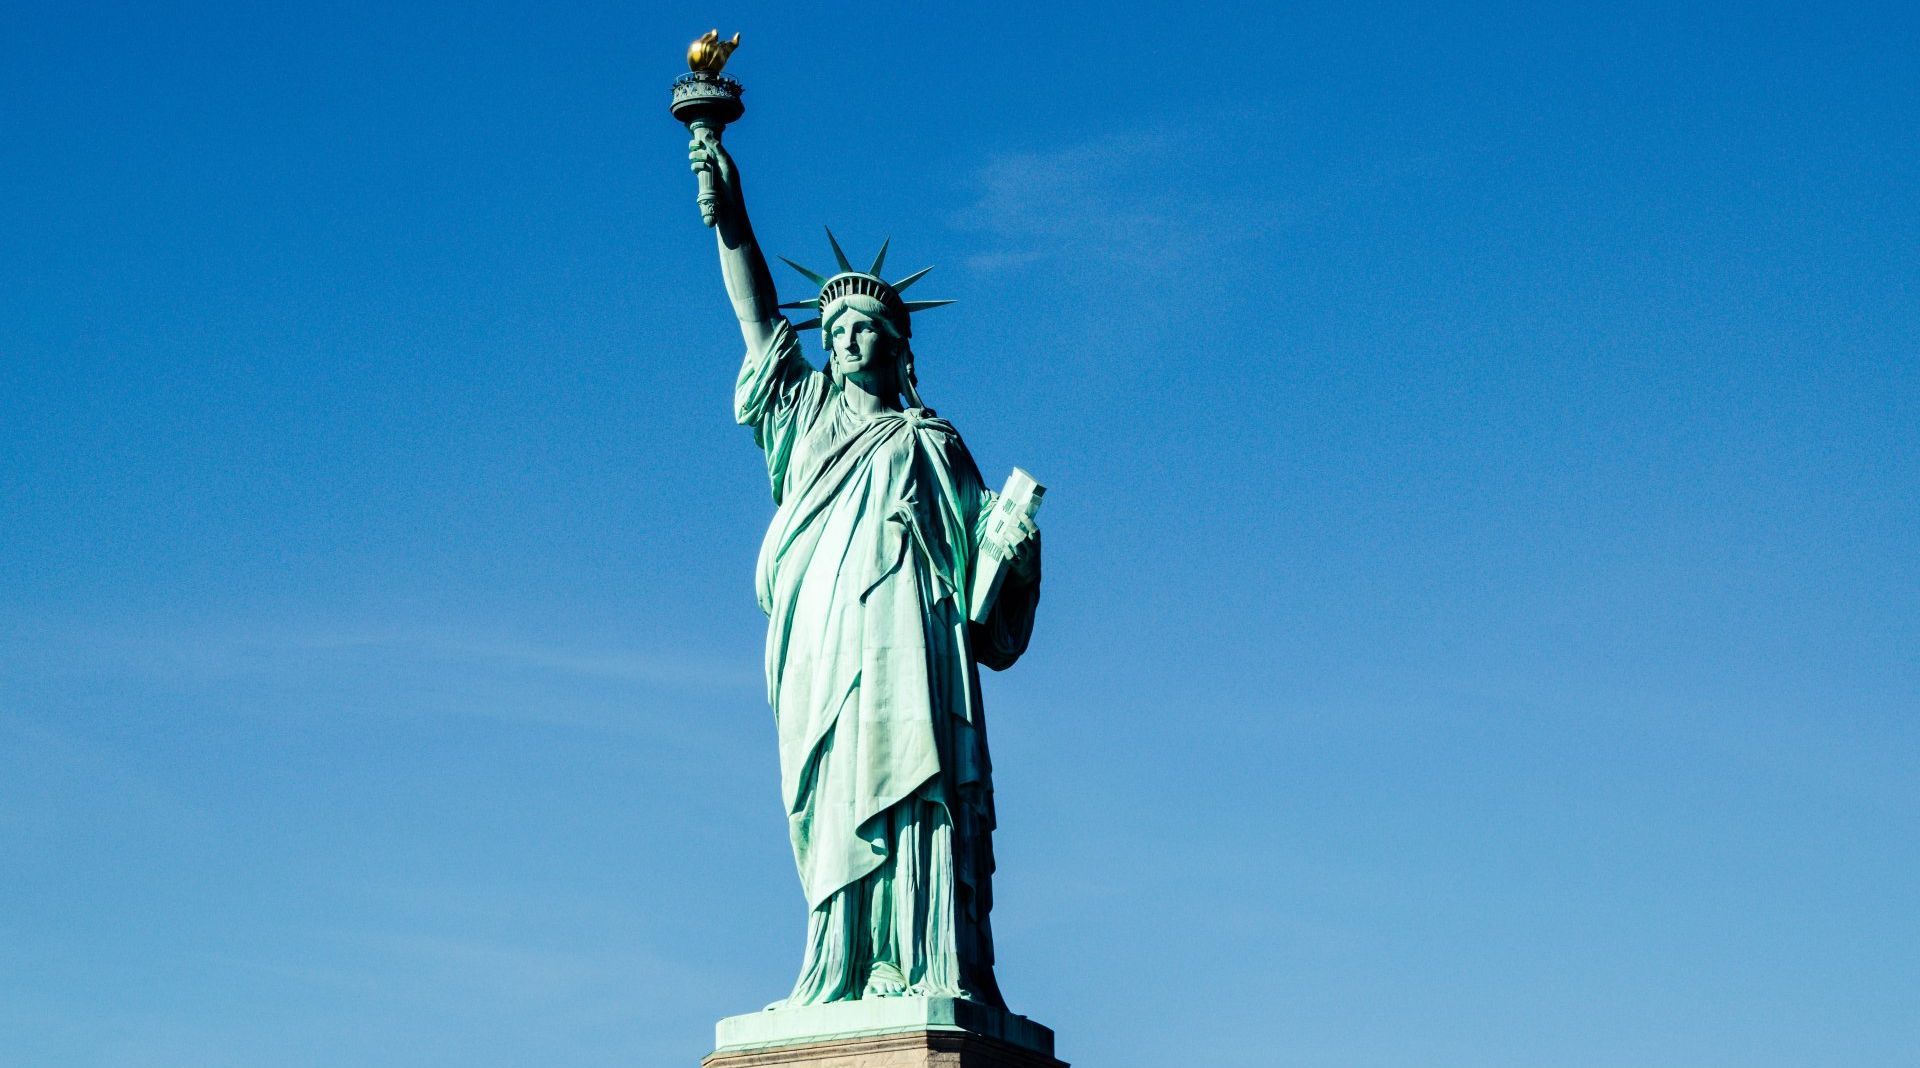 The statue of liberty is against a blue sky